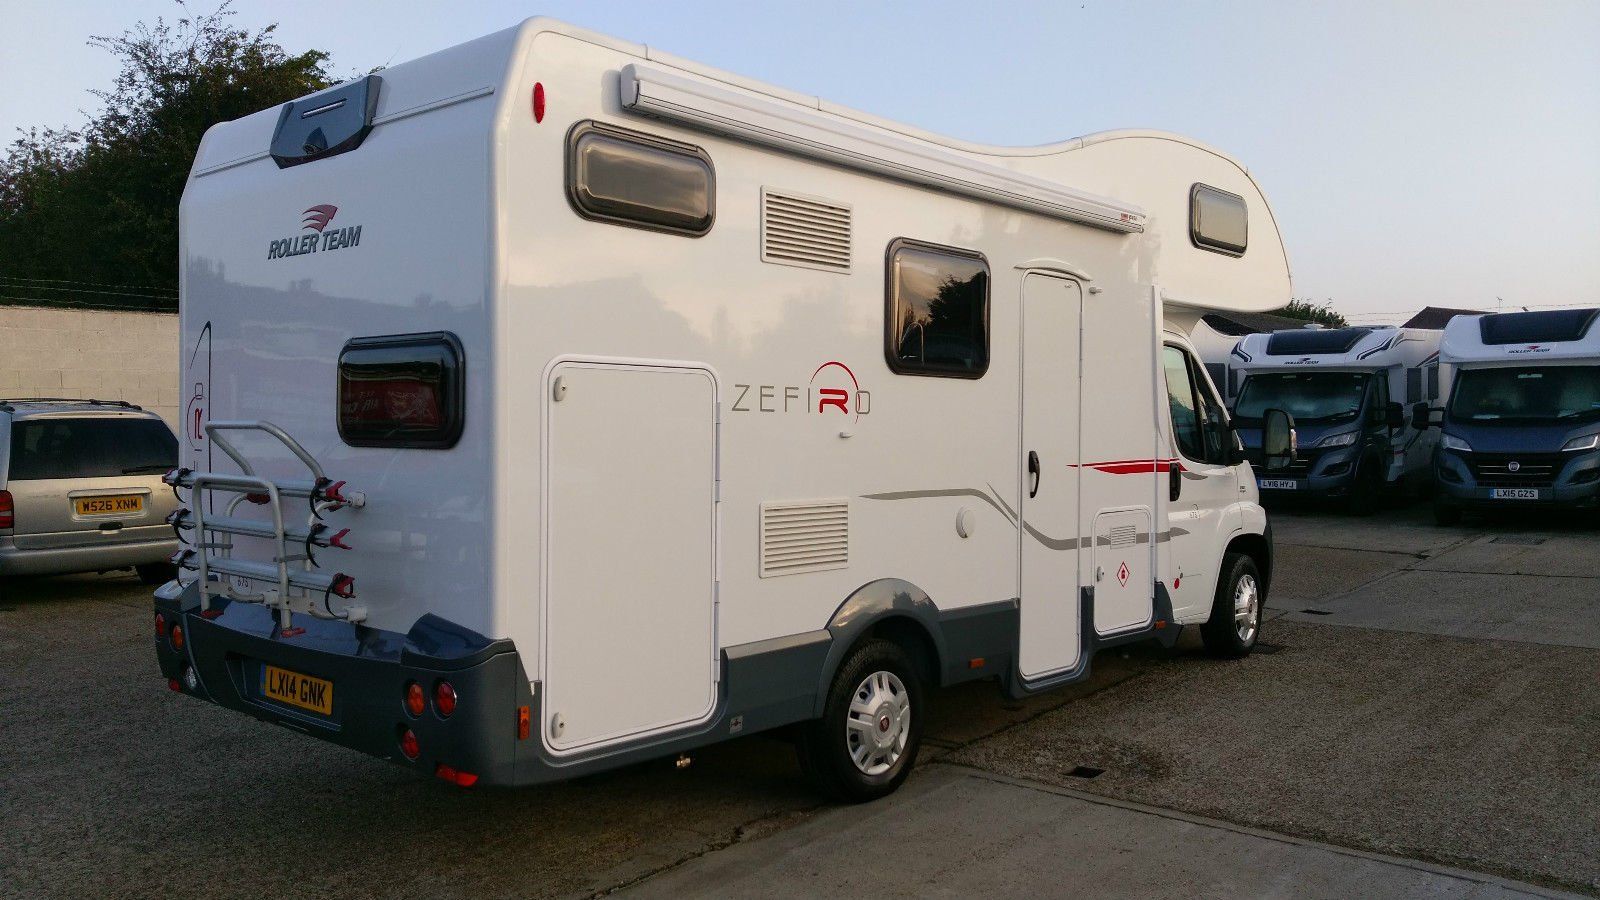 roller team, zefiro 675, 6 beth, motorhome, with 6 seat belts, for sale, second hand, used, motor home,